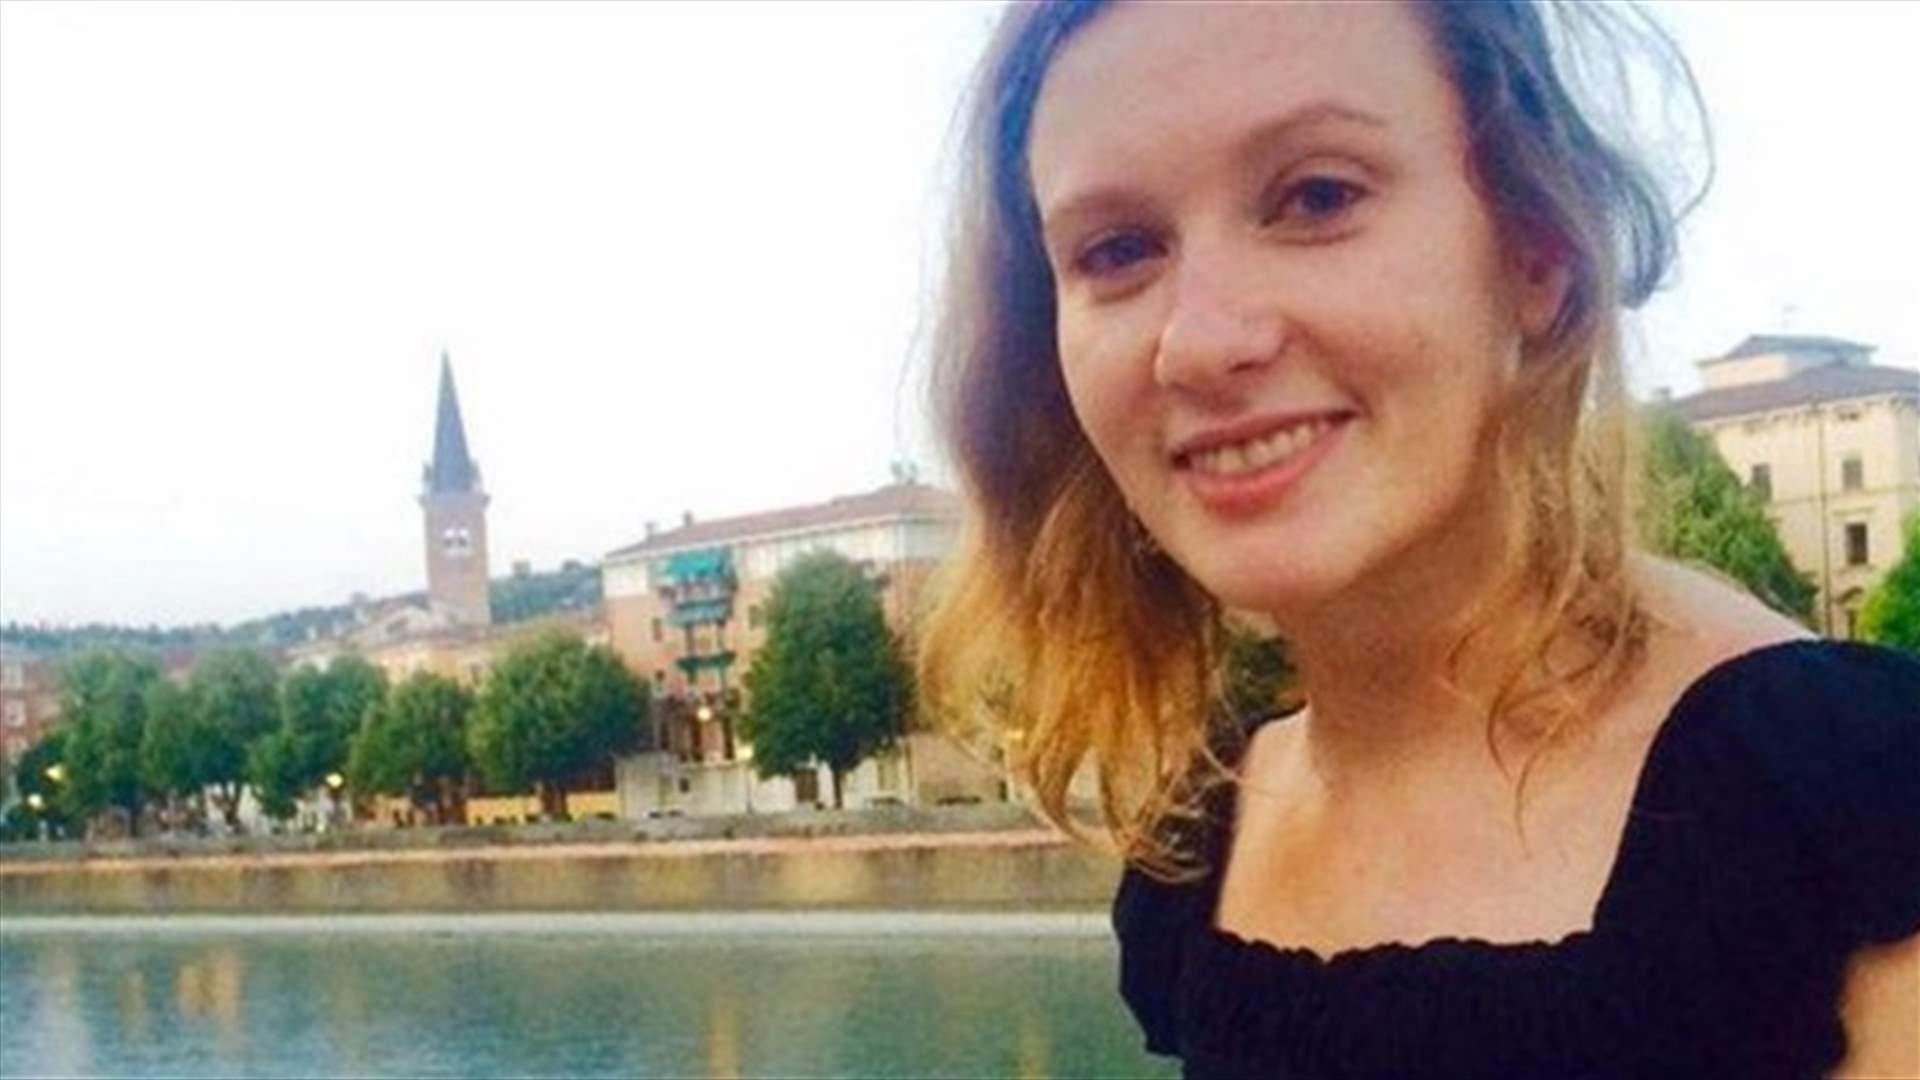 Lebanon to put taxi driver on trial in murder of British woman